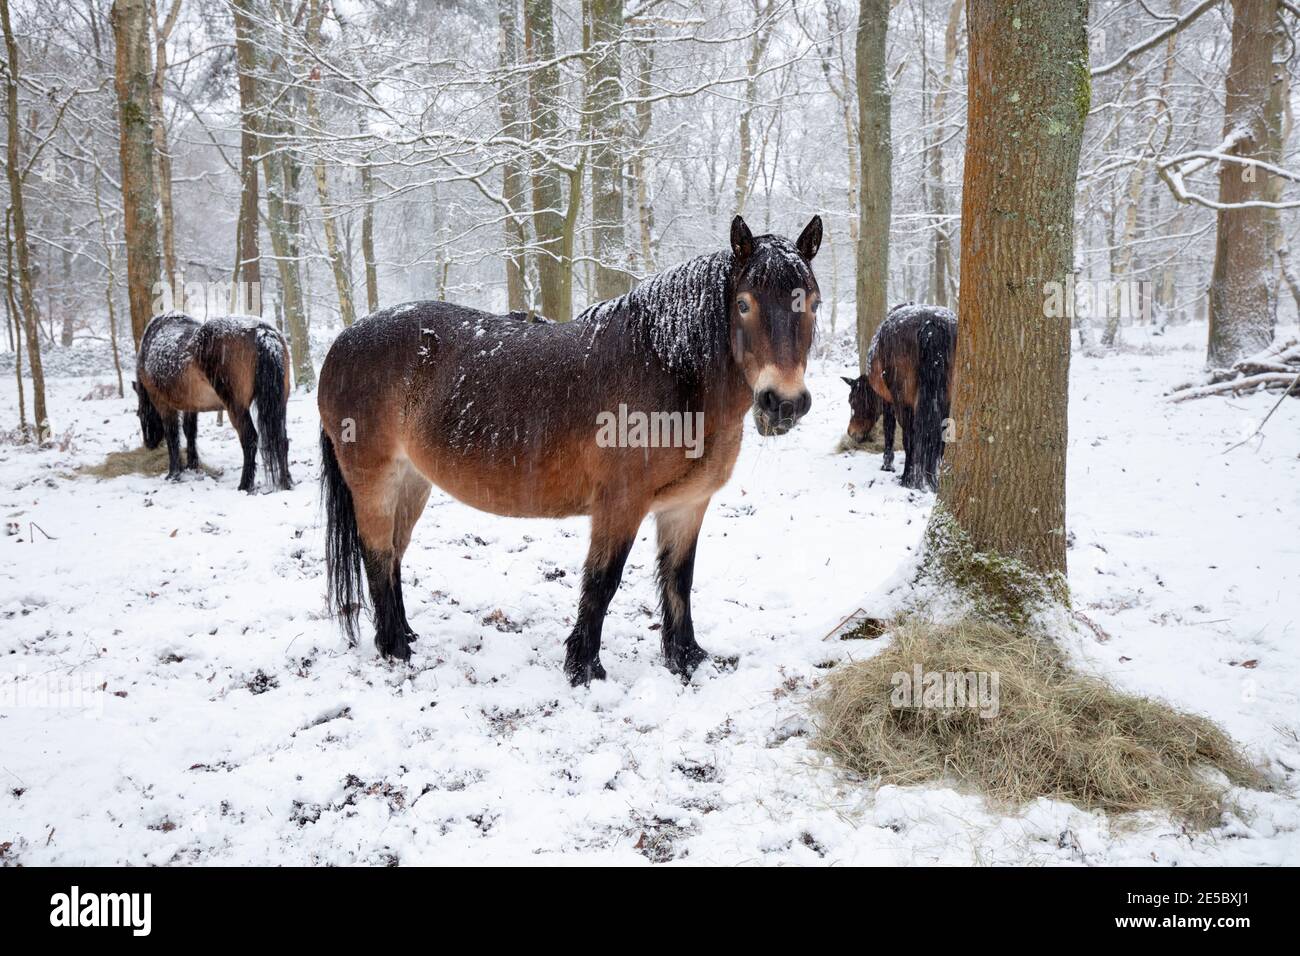 Wild ponies being fed piles of hay in snow covered woodland, Snelsmore Common, Newbury, Berkshire, England, United Kingdom, Europe Stock Photo